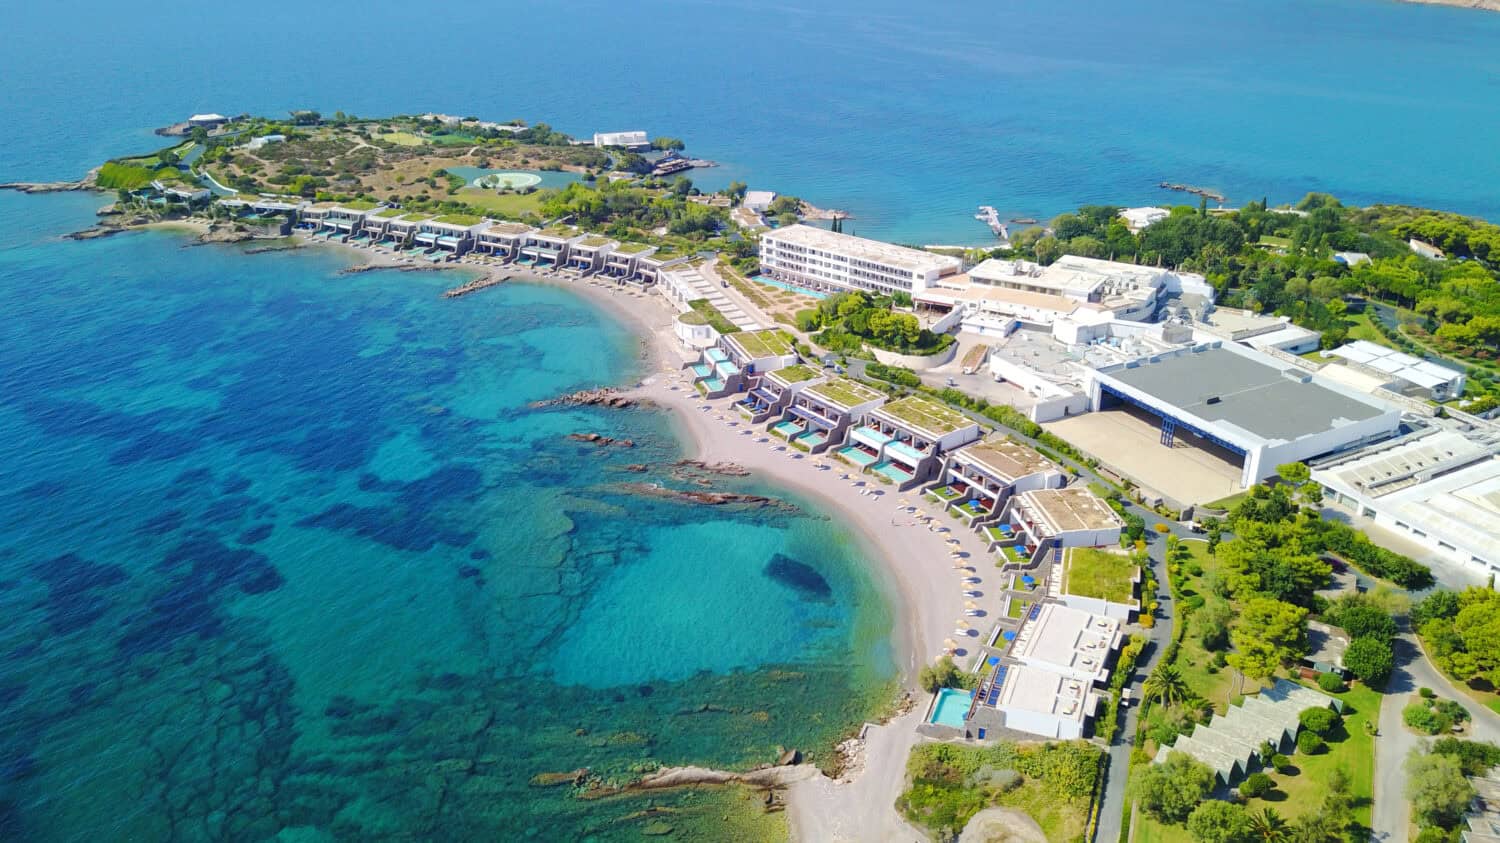 Aerial birds eye view photo taken by drone of Grand Resort Lagonissi resort with turquoise clear waters